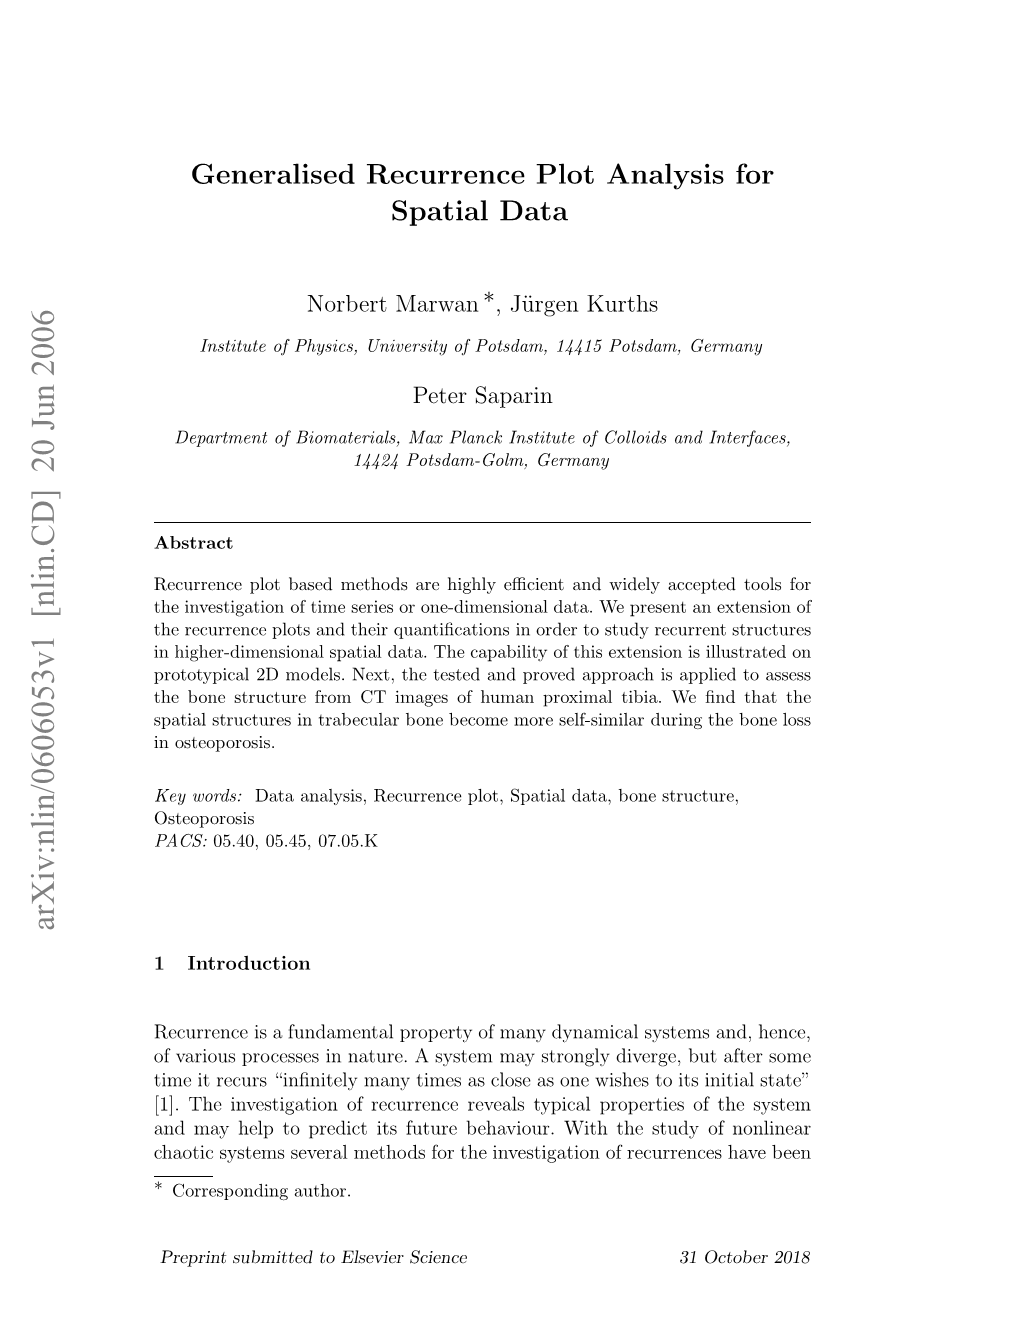 Generalised Recurrence Plot Analysis for Spatial Data